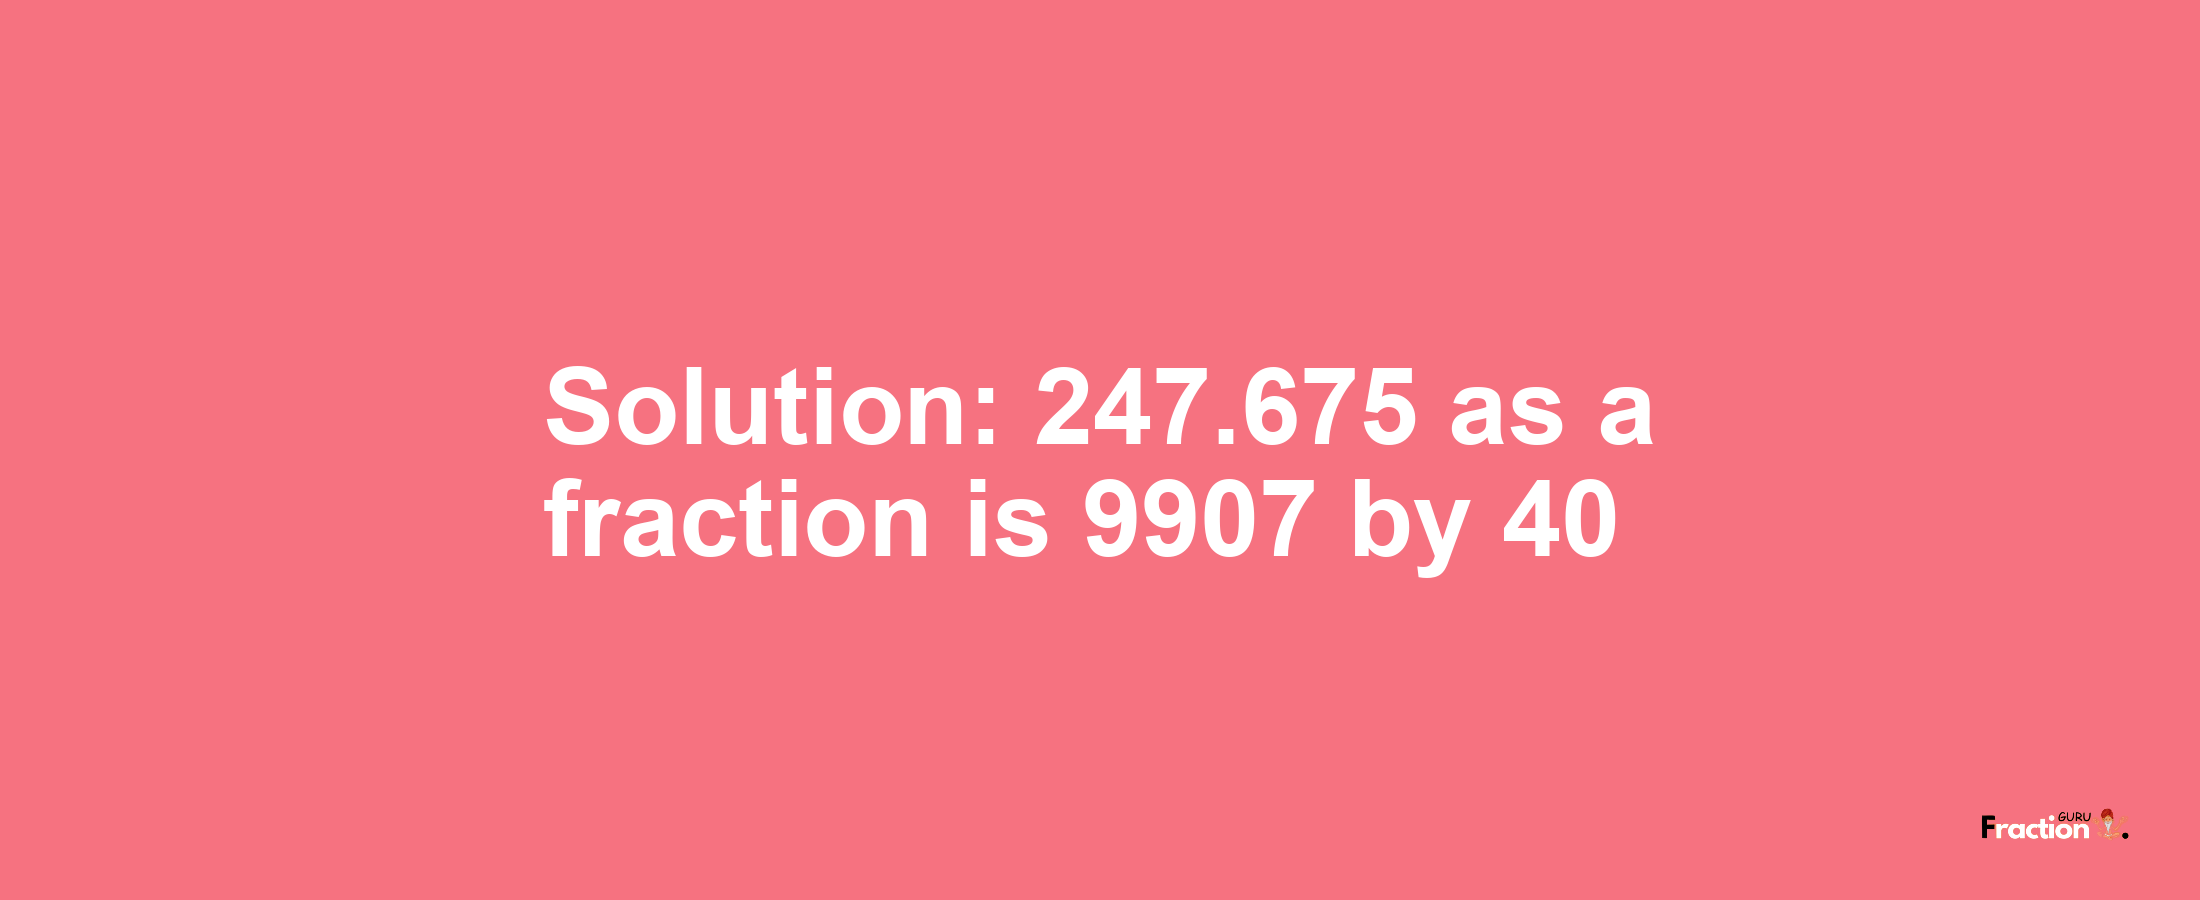 Solution:247.675 as a fraction is 9907/40